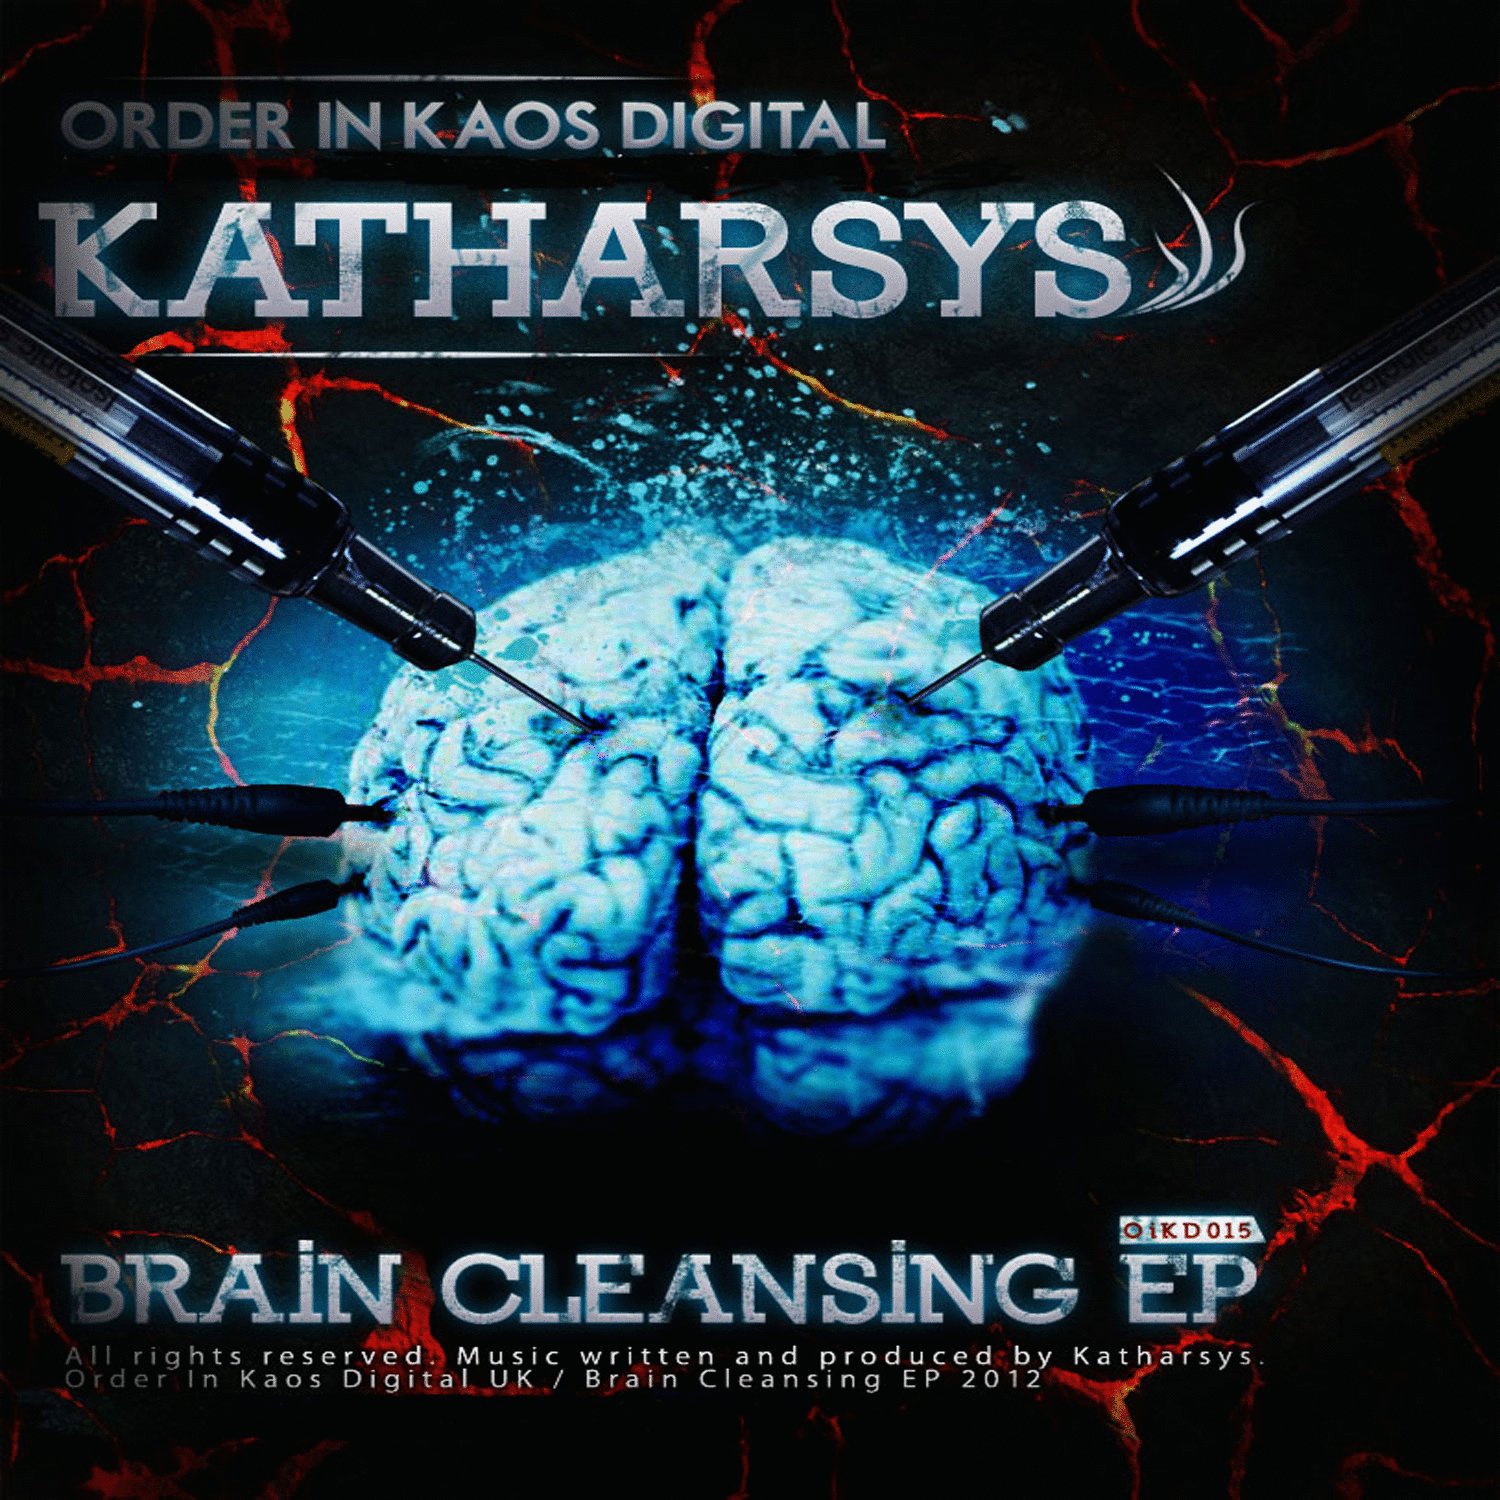 Clean brain. Katharsys. Katharsys – SADDICTION / Erges. Katharsys - Ghost (Original Mix). Therapy sessions Drum Bass цветная logo.